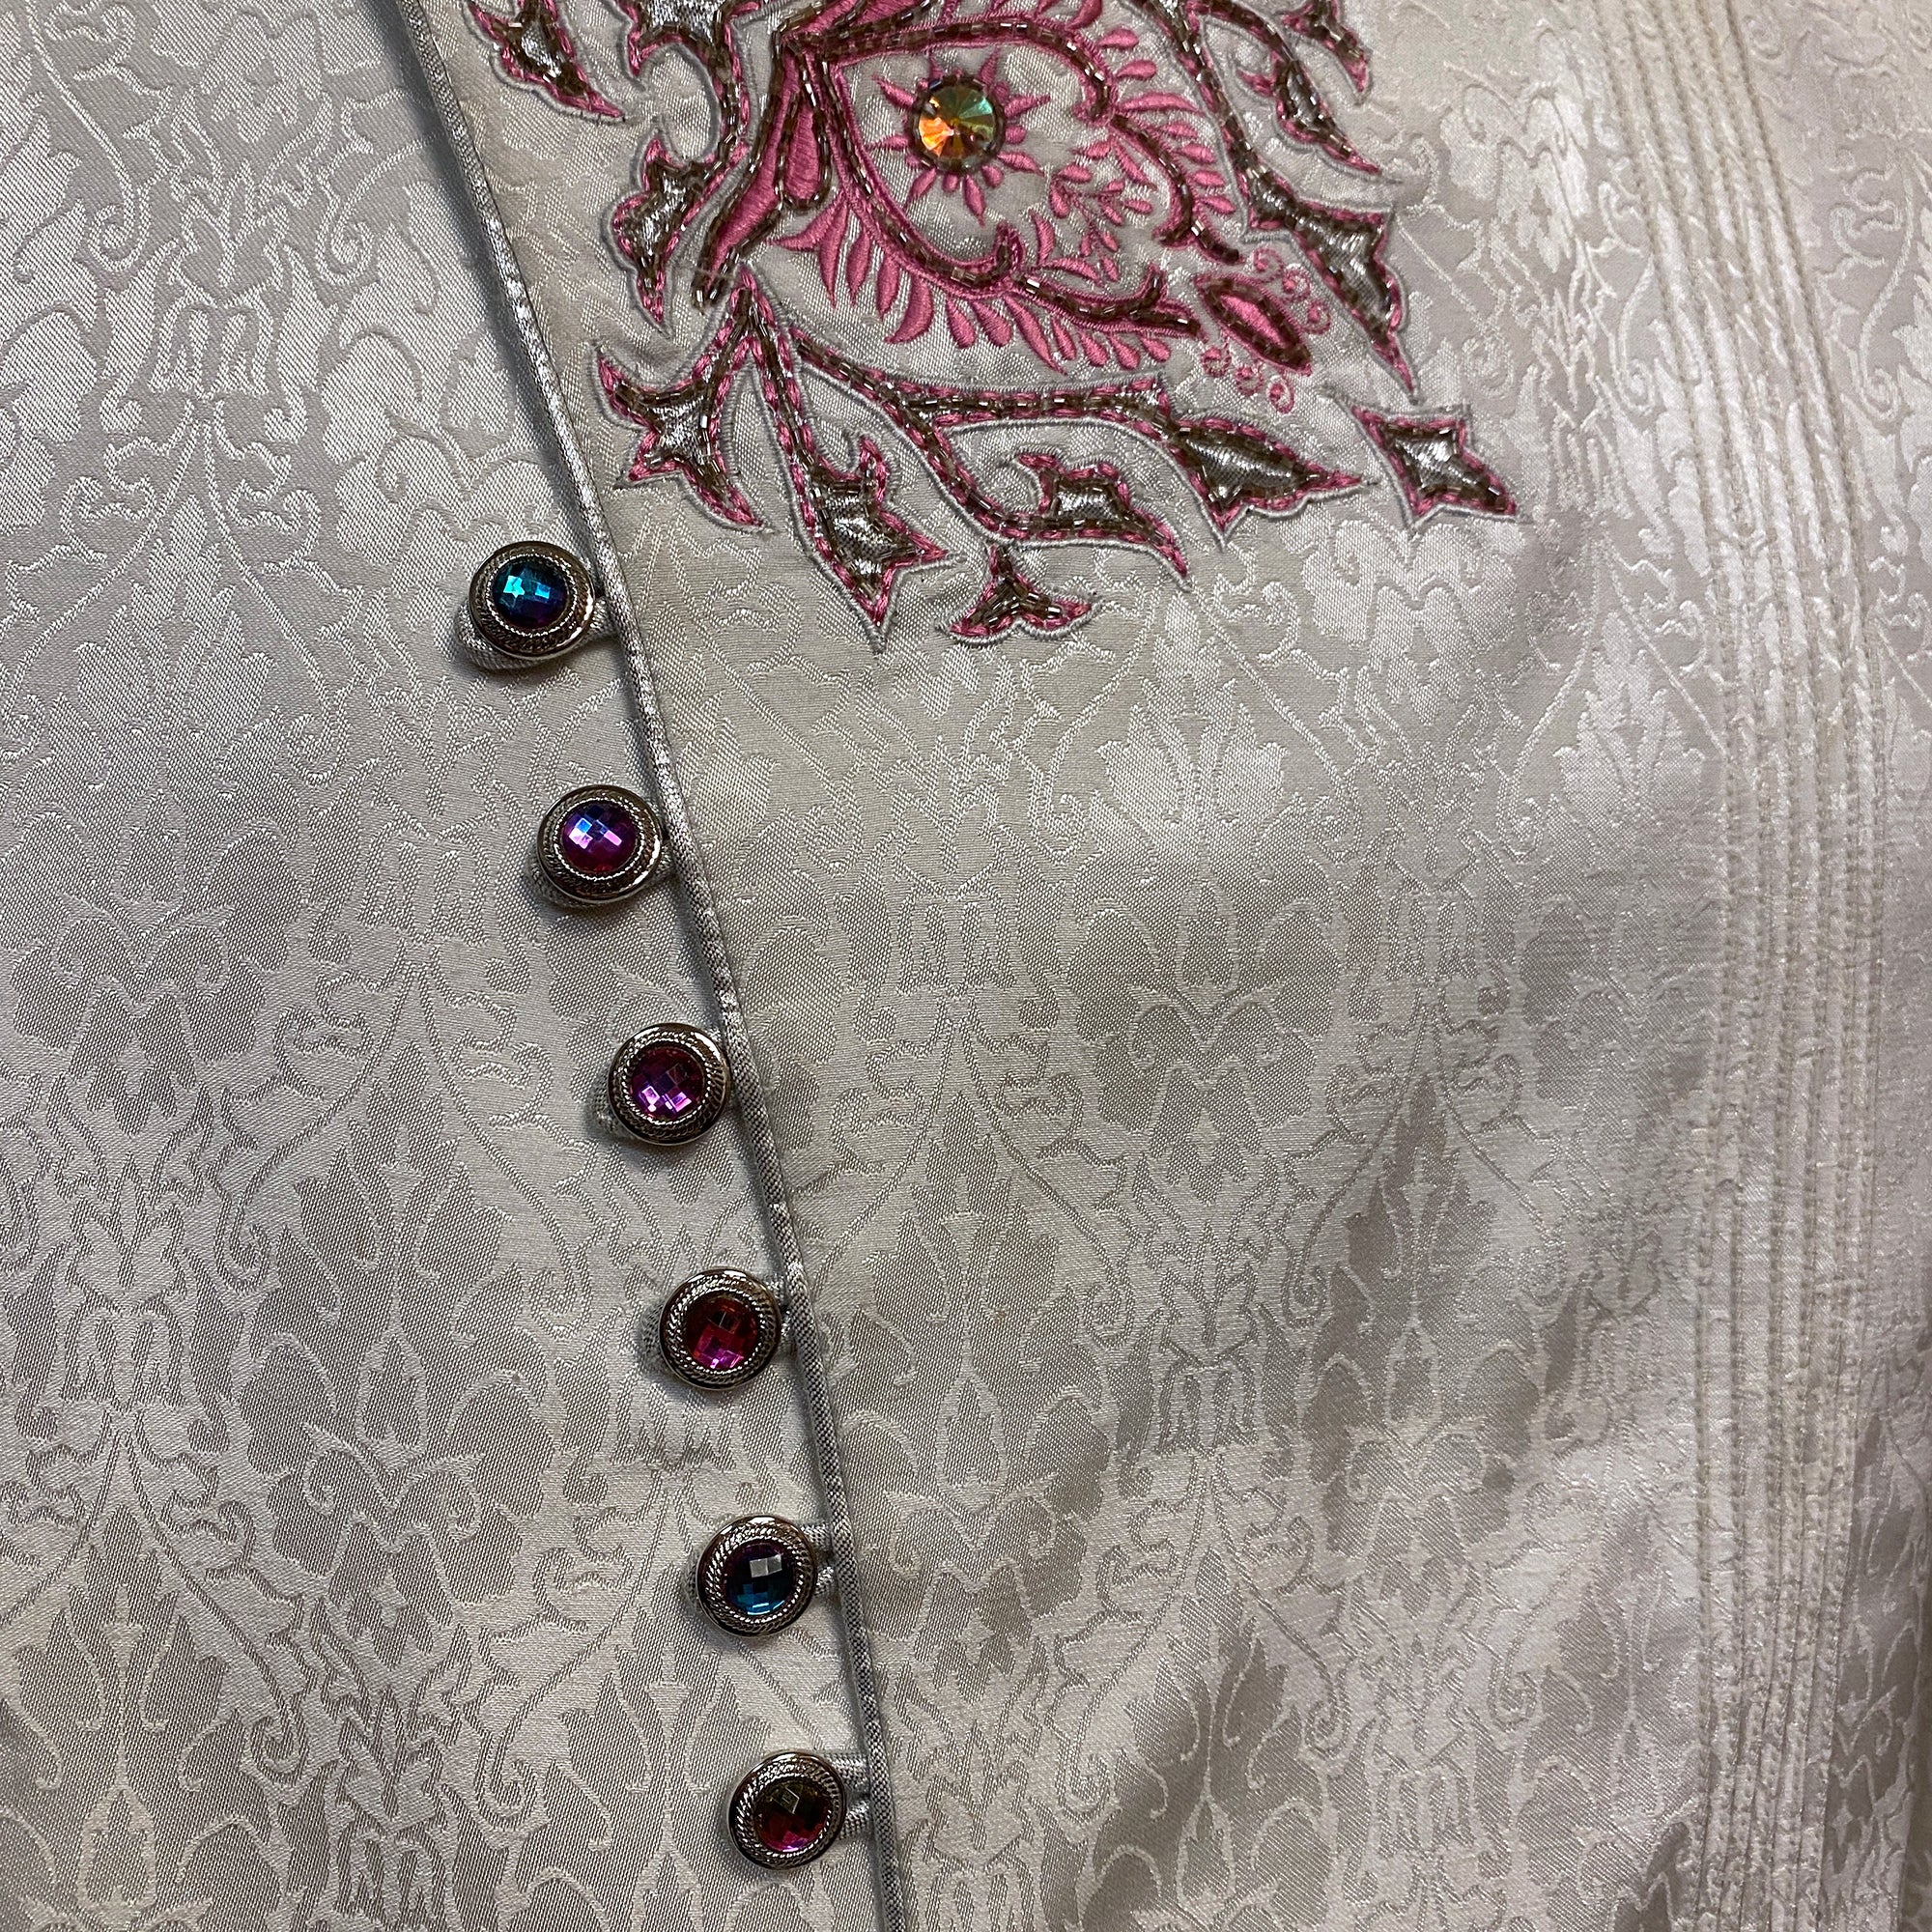 White Sherwani with Pink Embroidery - Vintage India NYC